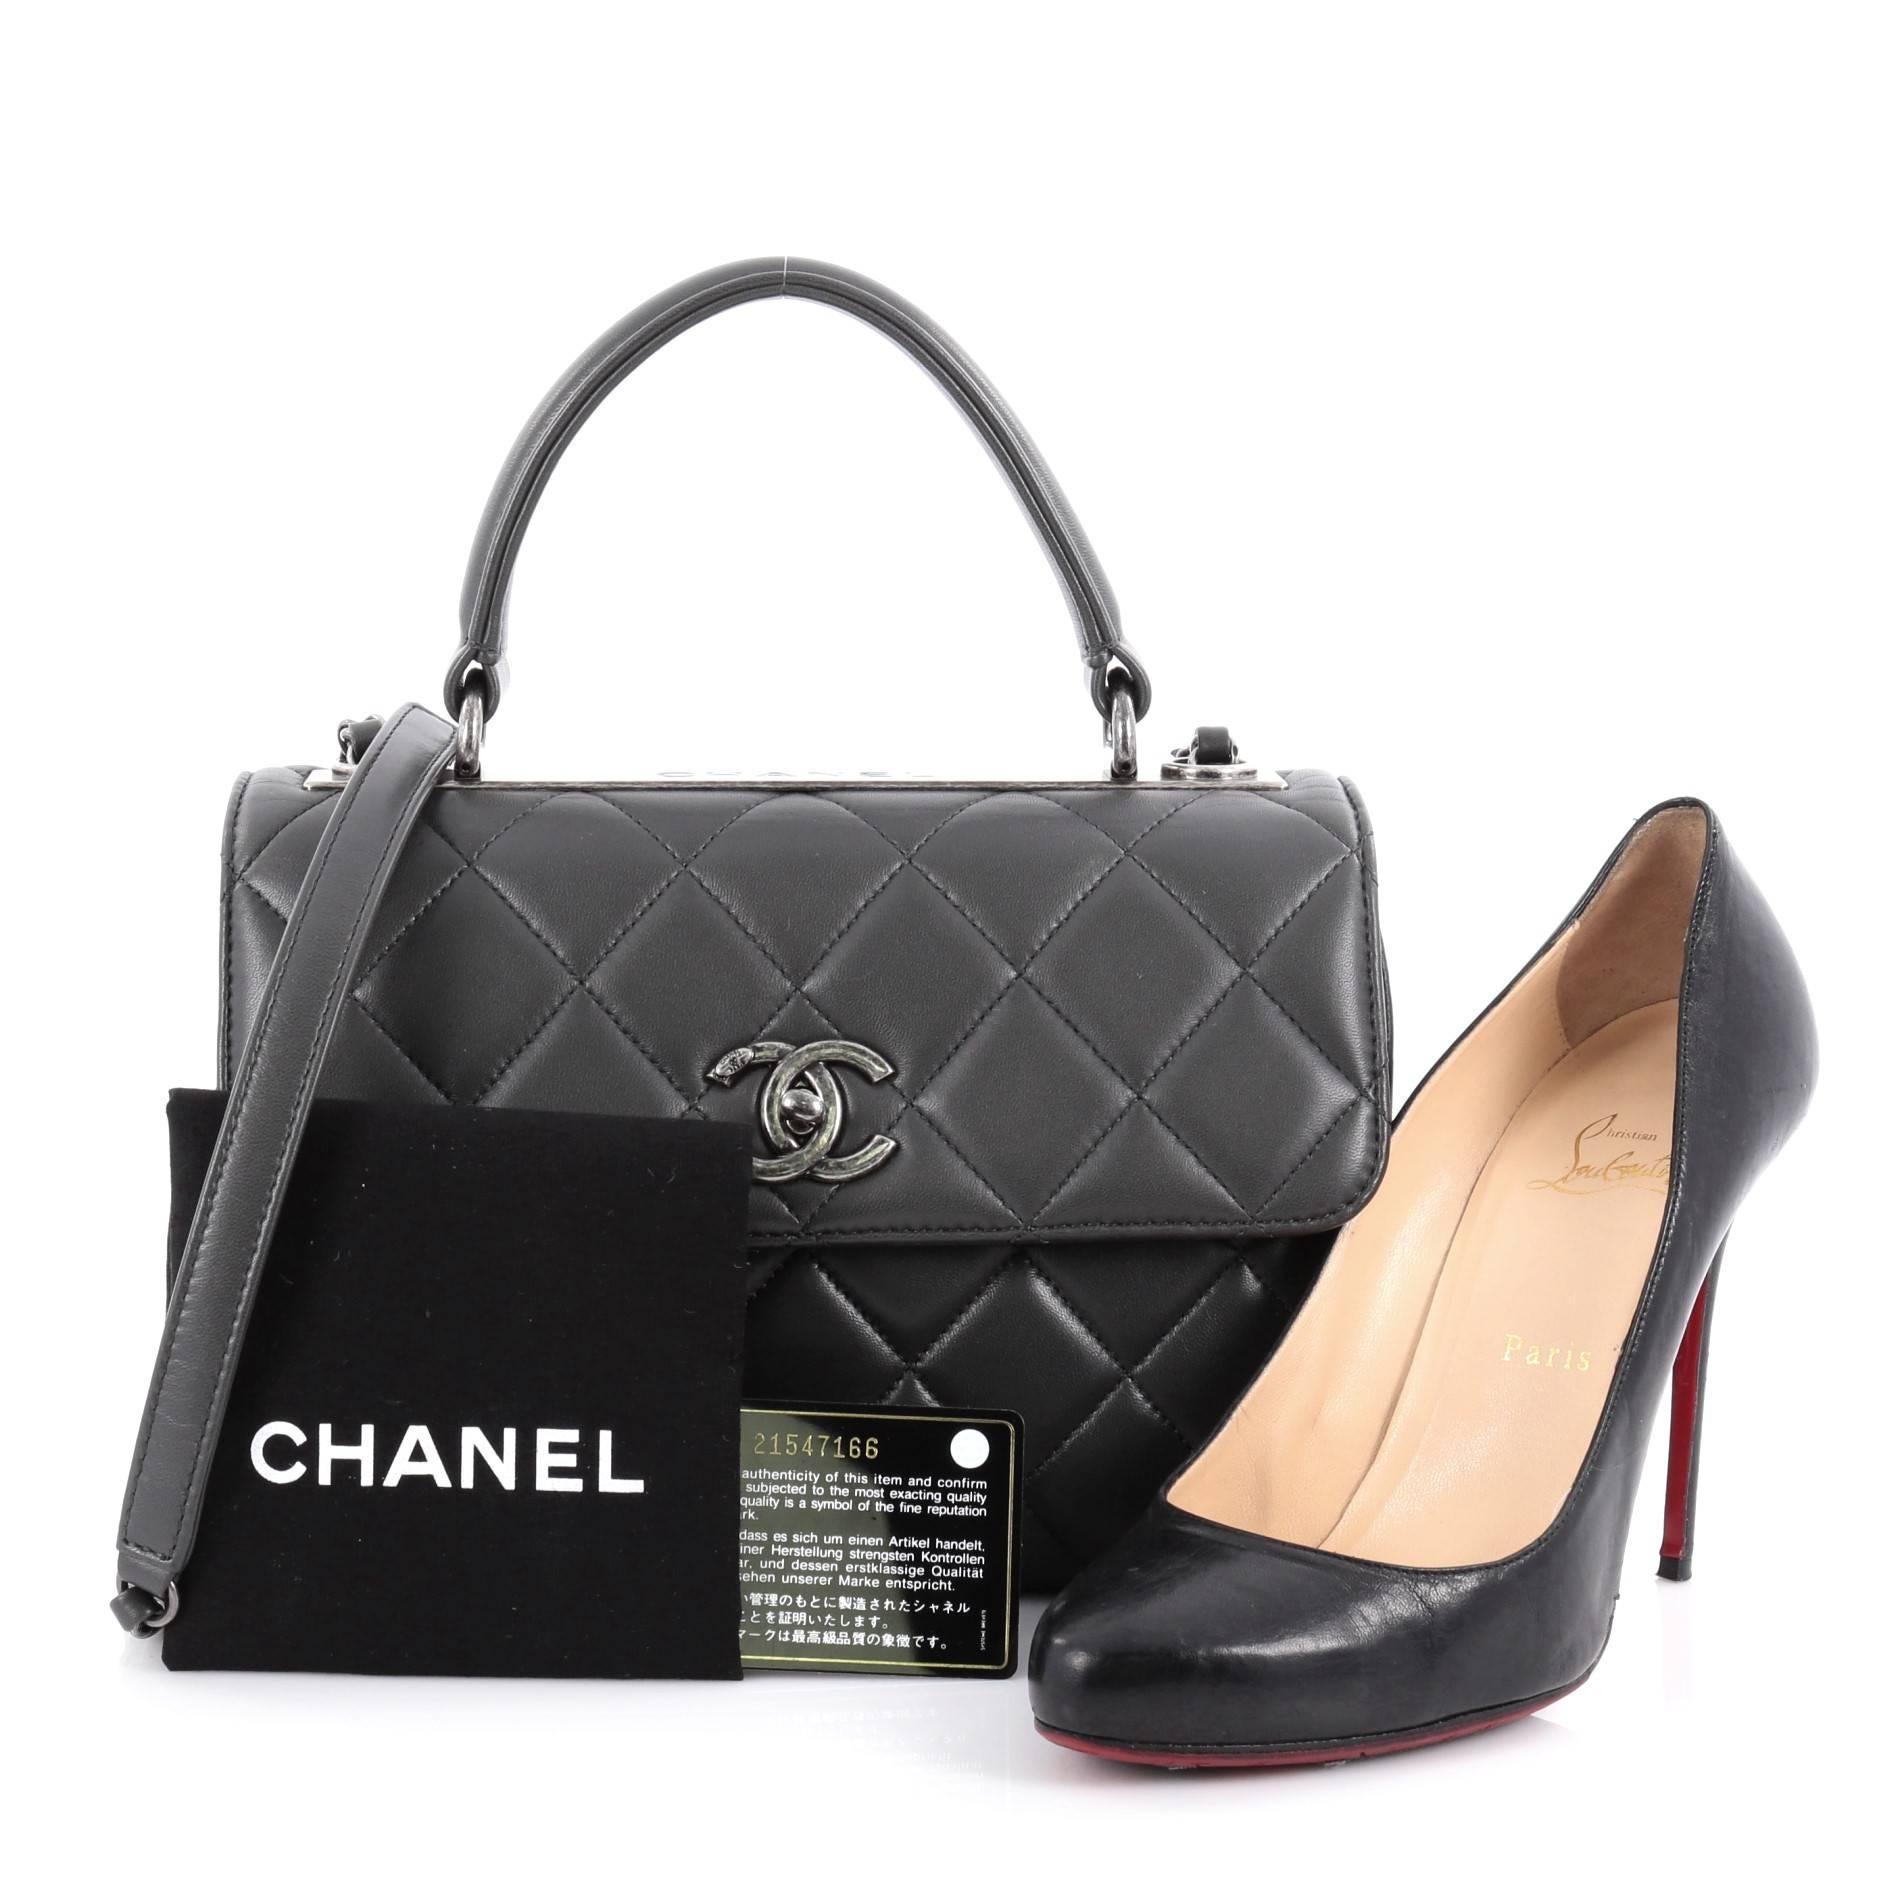 This authentic Chanel Trendy CC Top Handle Bag Quilted Lambskin Small is a marvelous day or evening bag from the brands' Chanel's 2015 collection. Crafted from grey quilted lambskin leather, this chic bag features flat leather top handle, woven-in